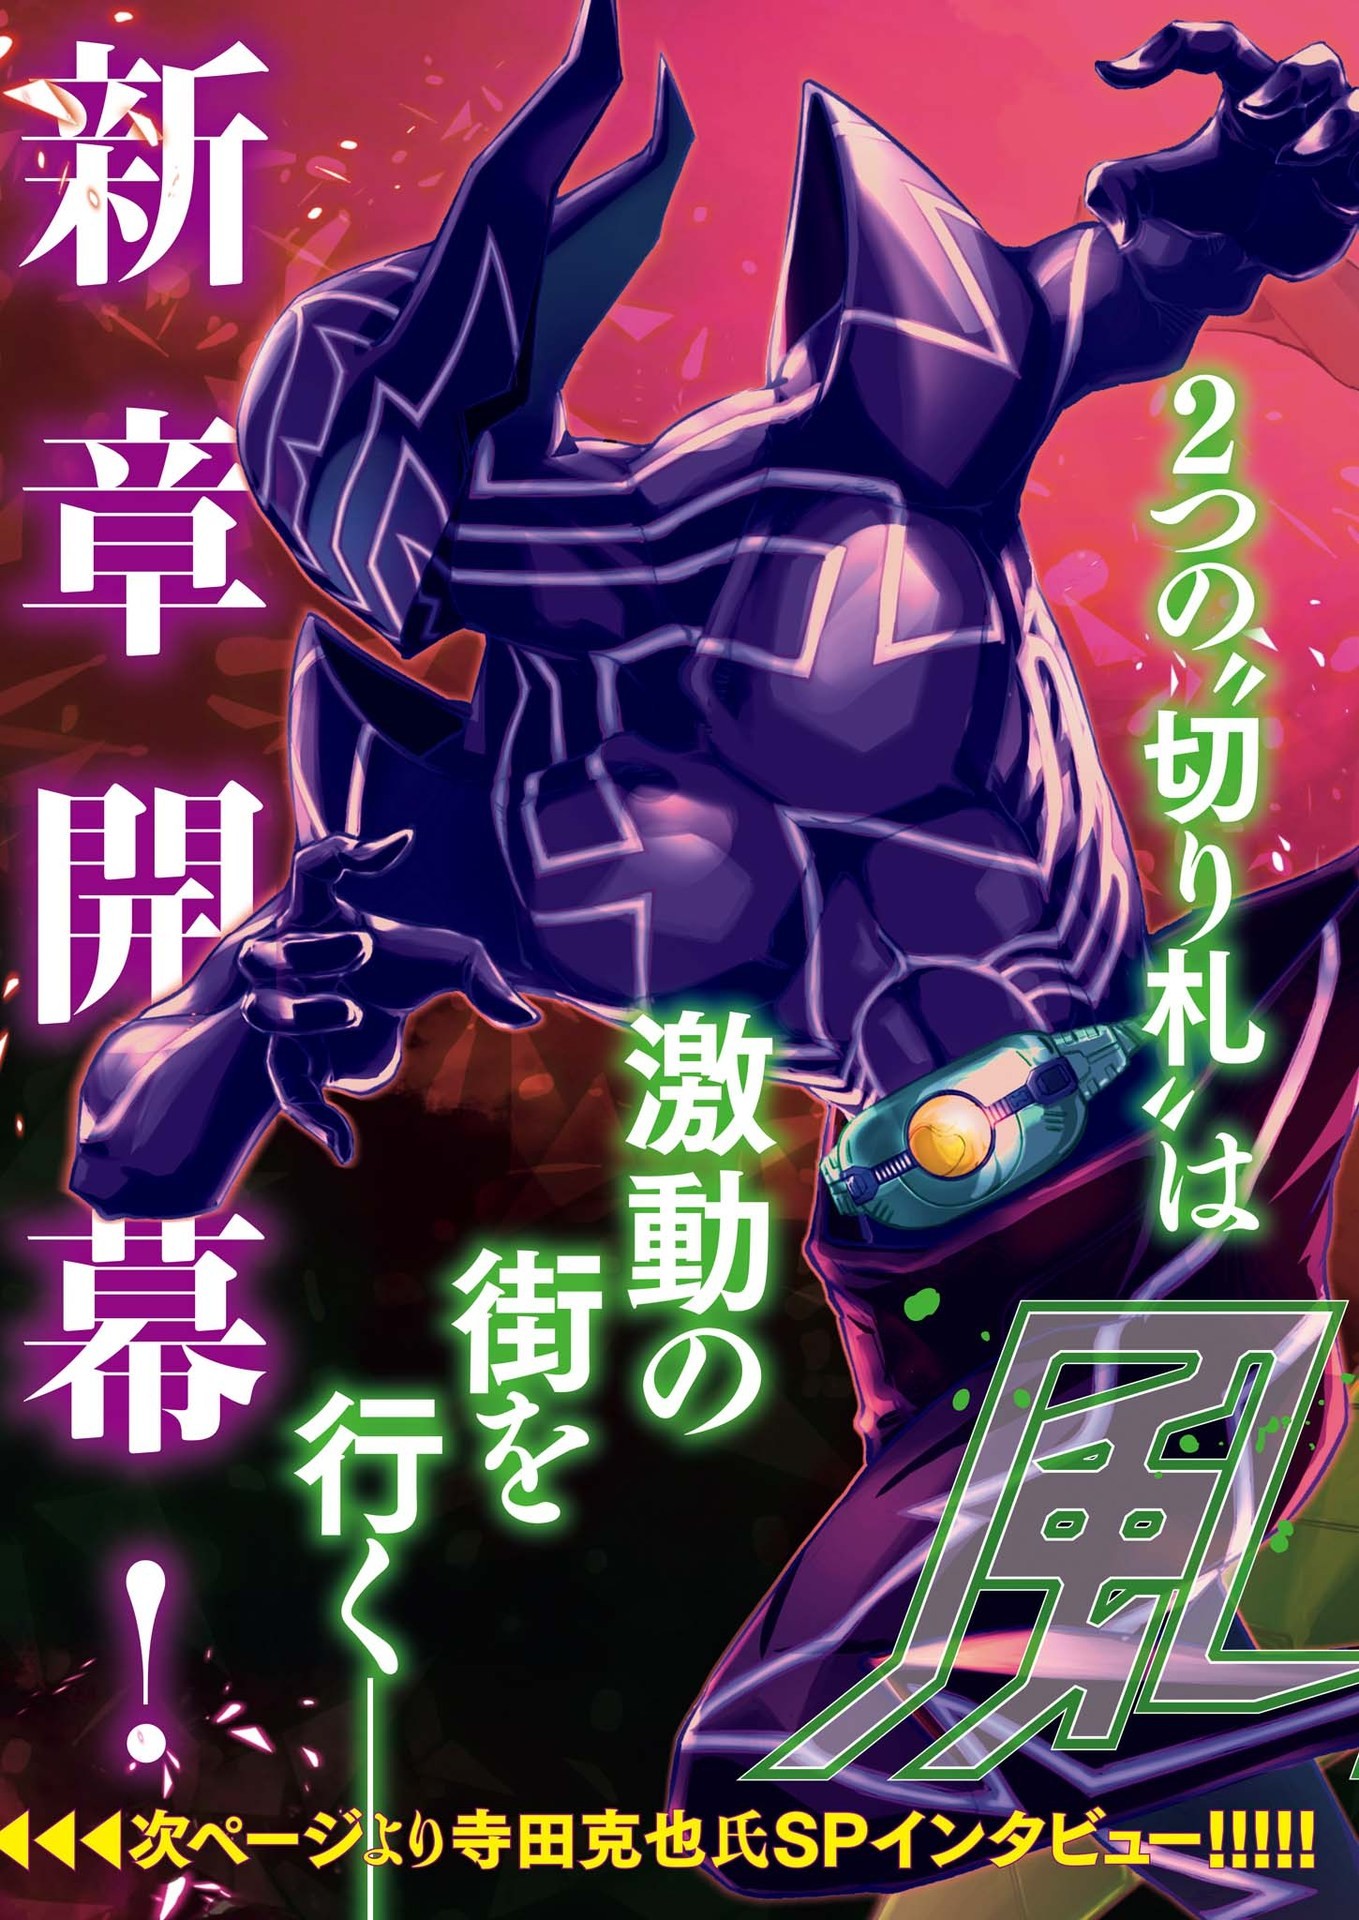 LewdsnReviews on X: Kamen Rider W: Fuuto Tantei Volume 8 Cover A  mysterious woman claiming to be a witch steals a valuable bag from a man  vanishing into thin air. Having run